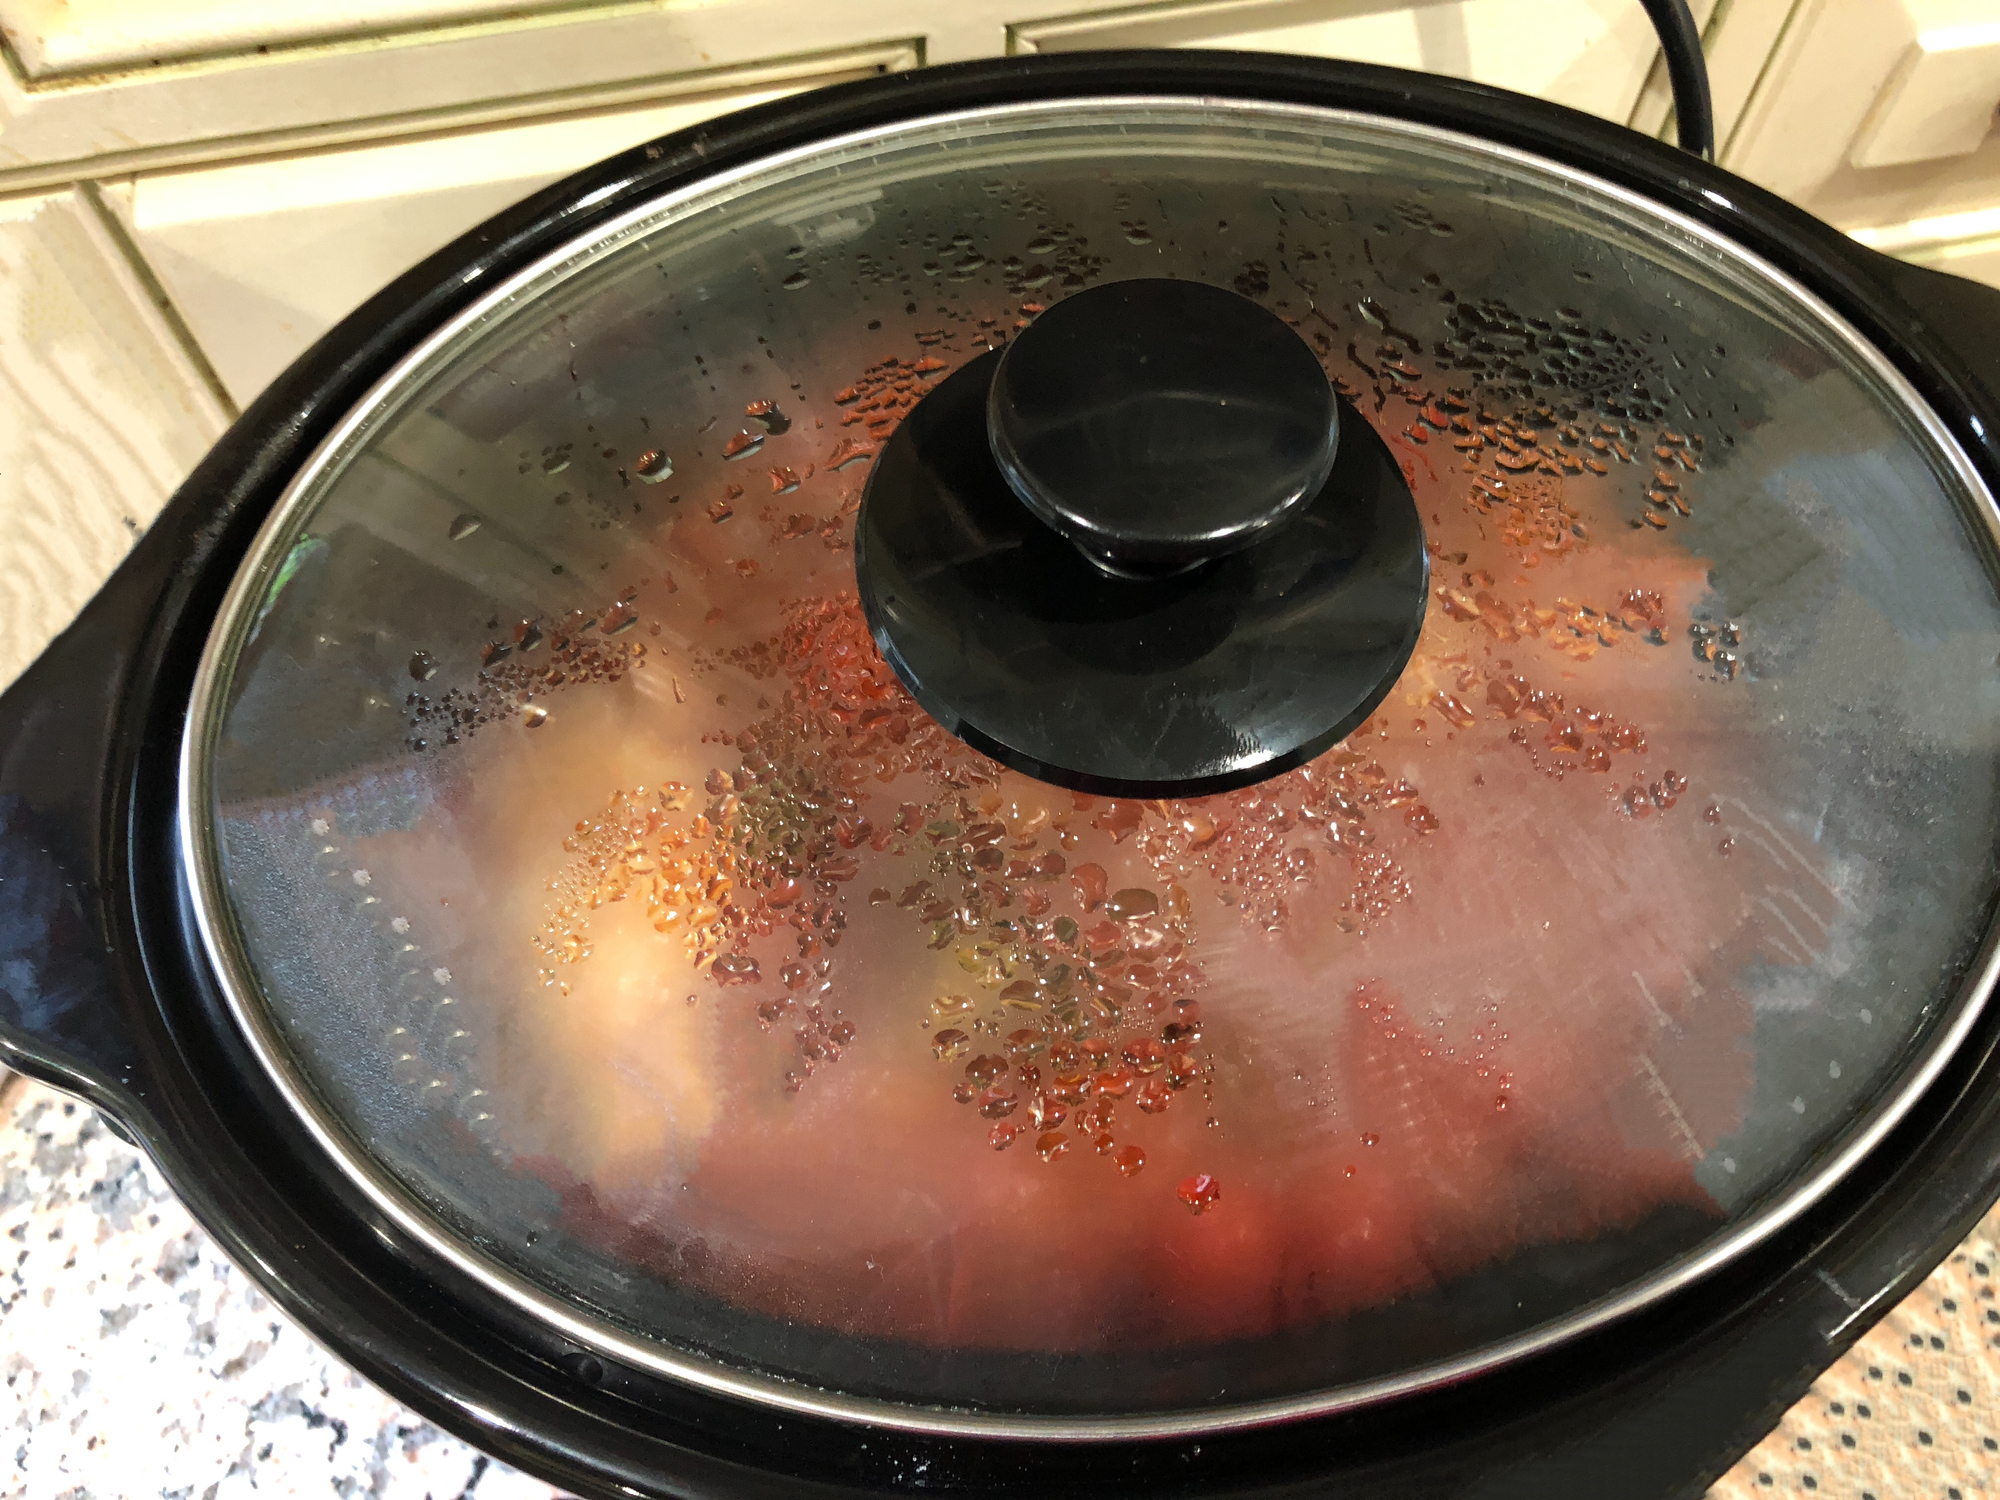 Food cooking in a closed slow cooker on a kitchen countertop